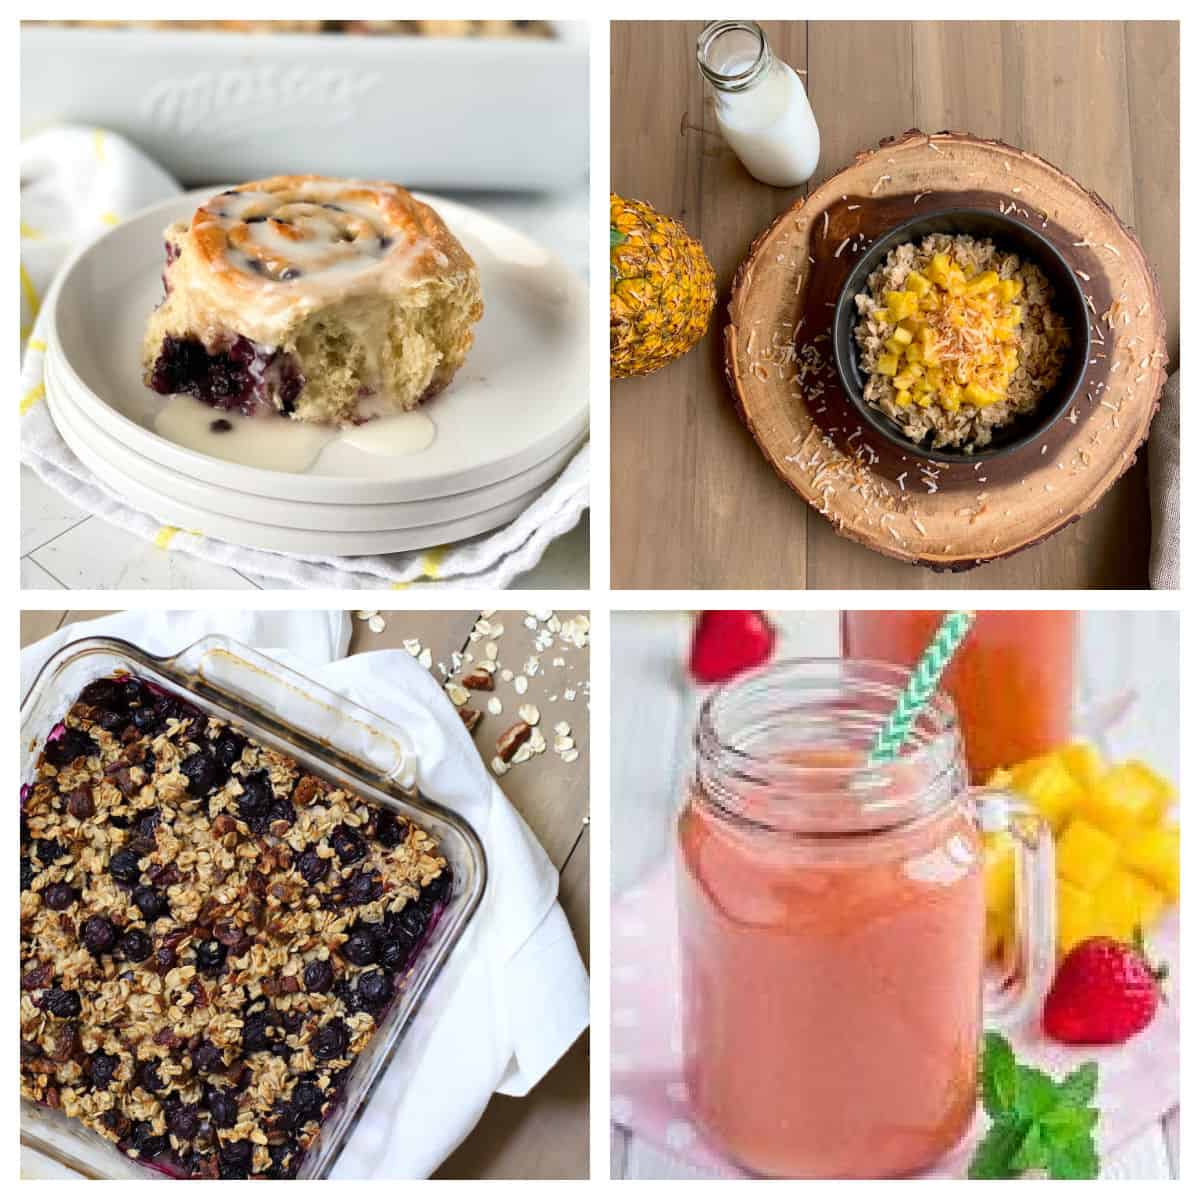 Breakfast bun, oatmeal, baked oatmeal, and a smoothie in a collage.